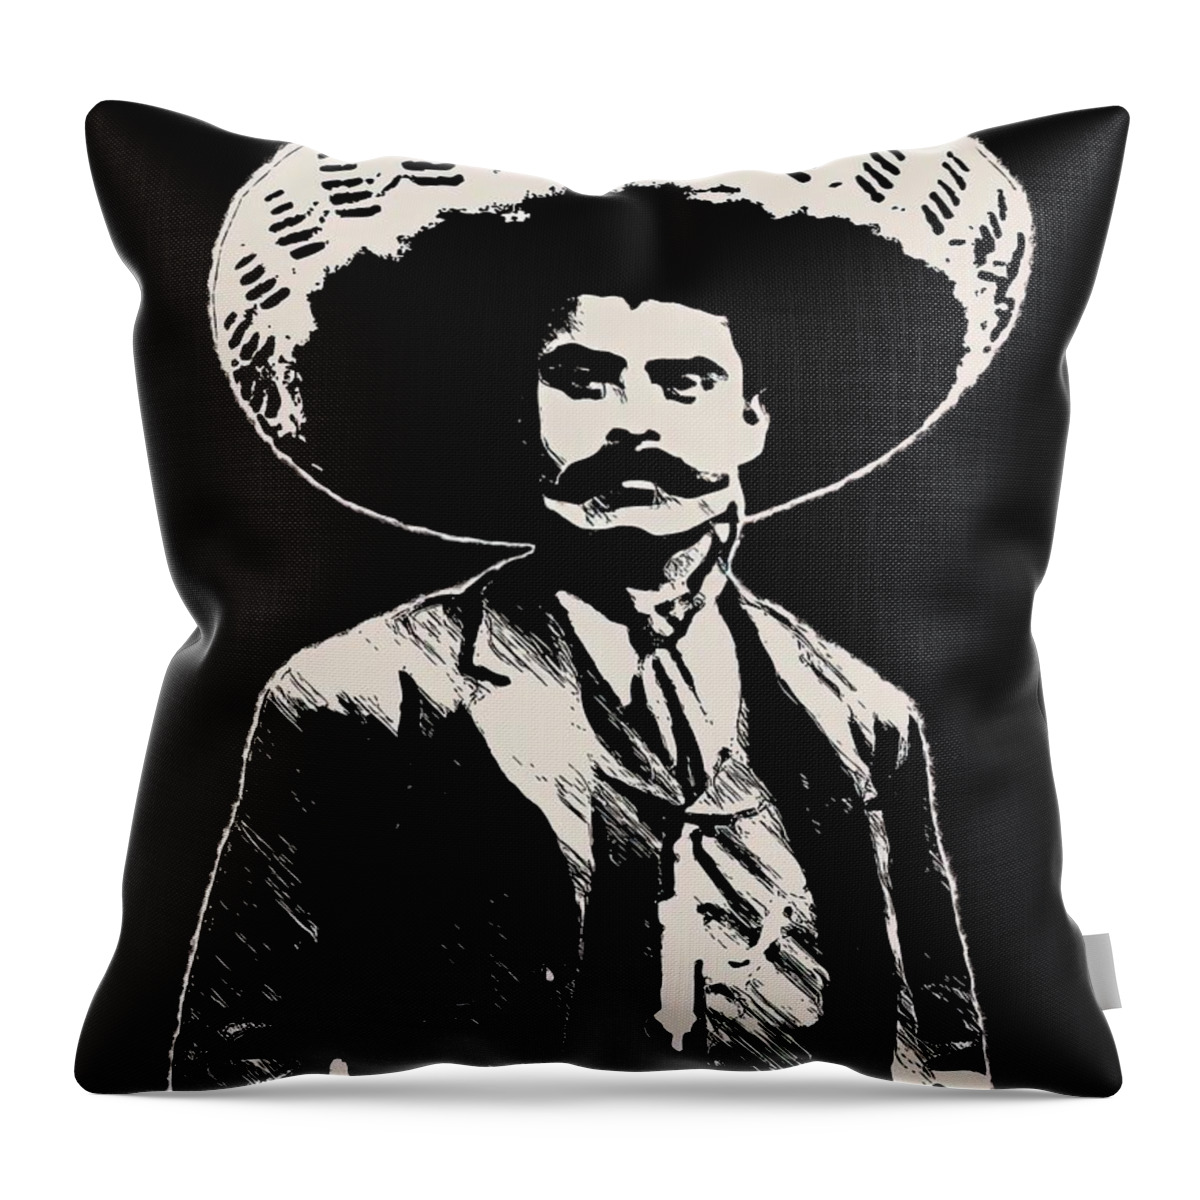  Cool Throw Pillow featuring the painting Emiliano Zapata bichrome black cremewhite by Graham Arthur